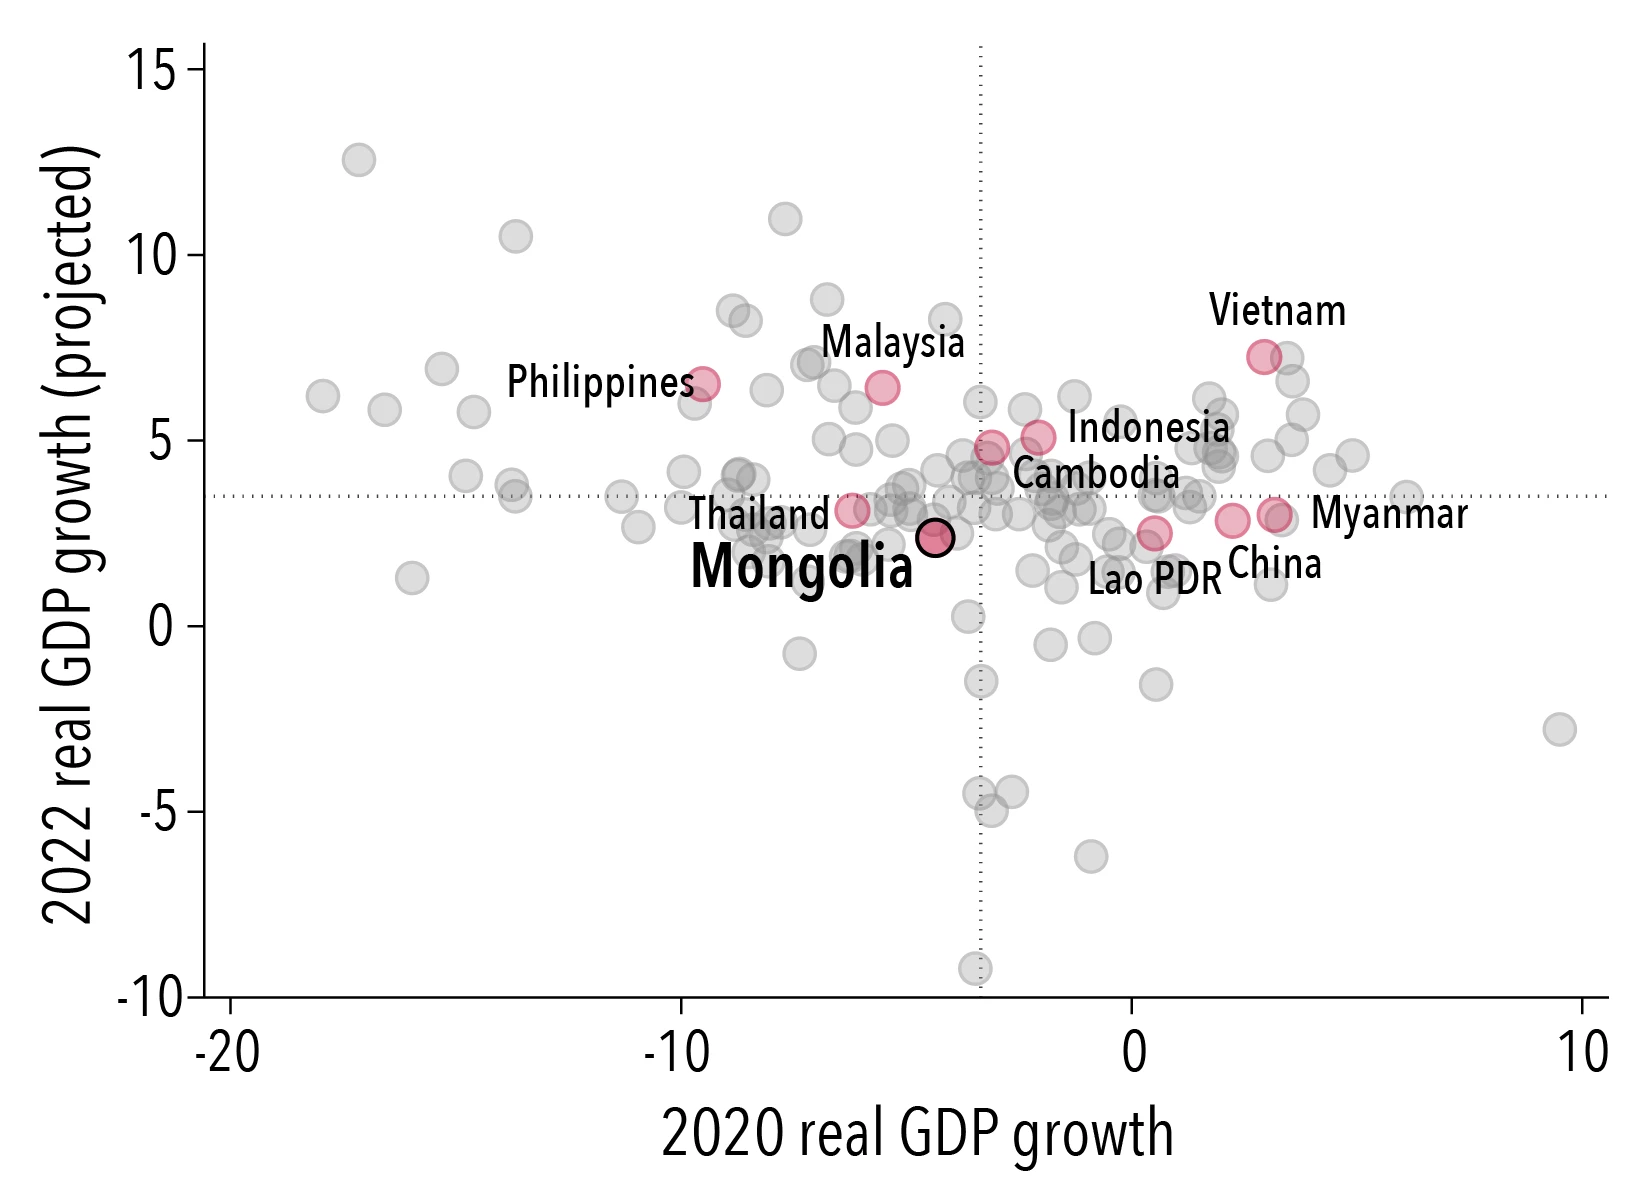 Figure 1. Real annual GDP growth (%): 2020 vs. 2022 (projected)